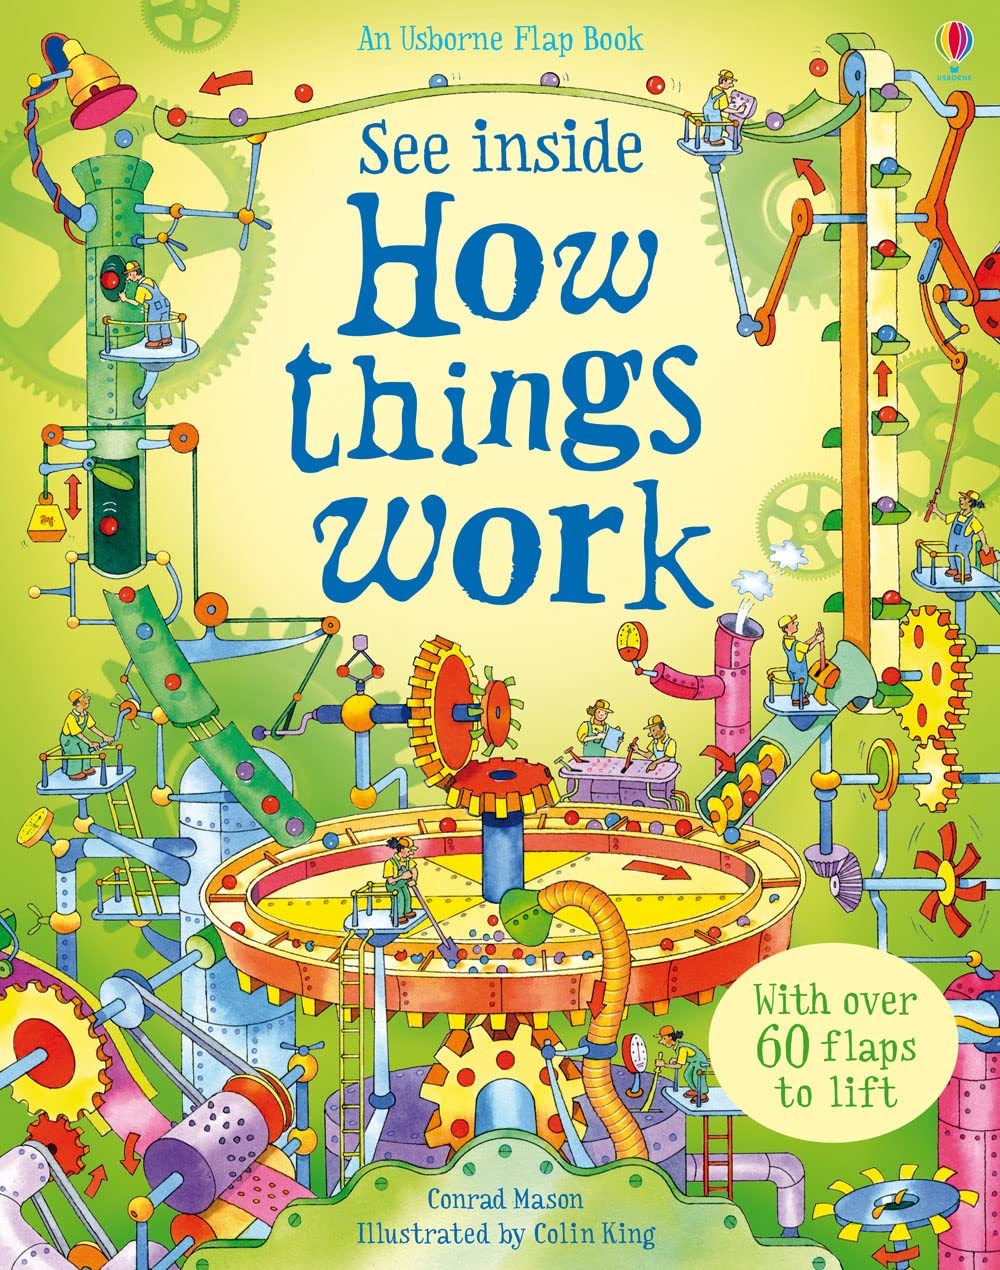 See inside how things work flap book kid's children's book 